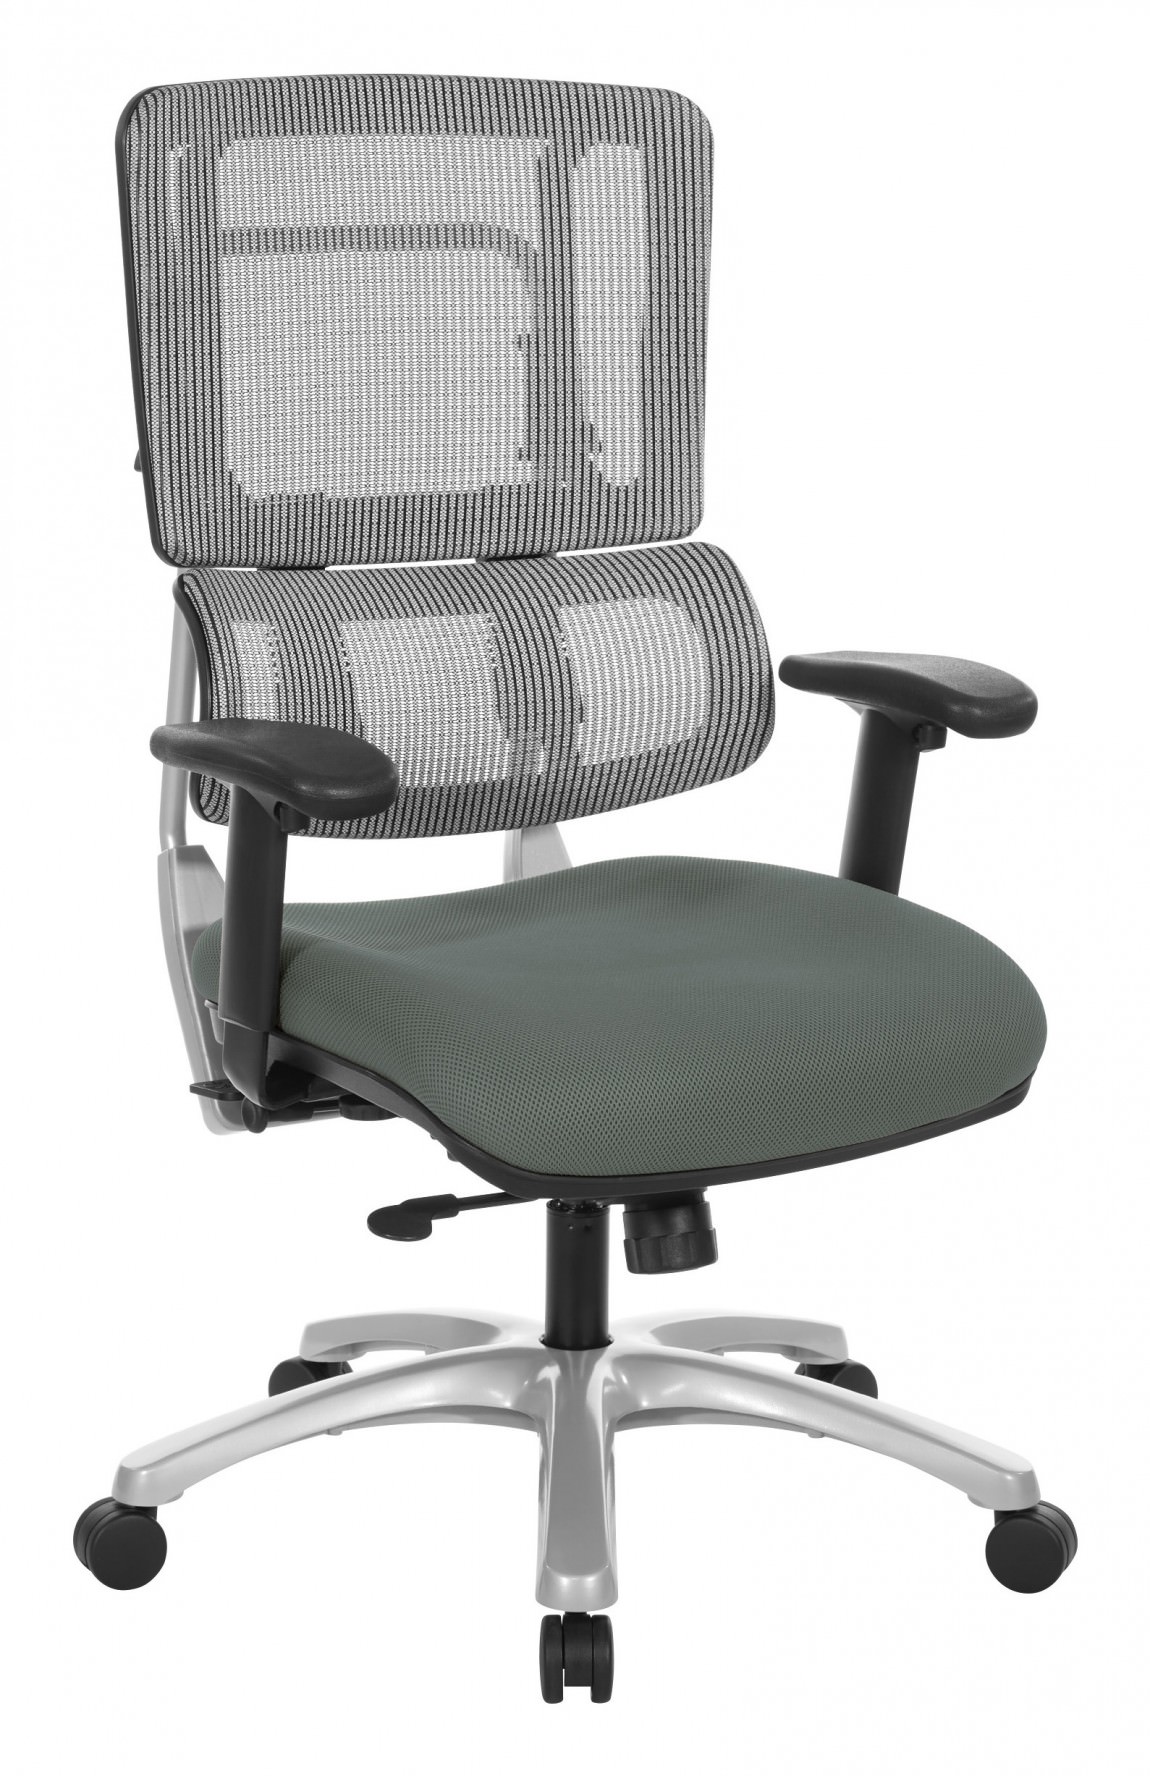 Mesh Task Chair with Lumbar Support